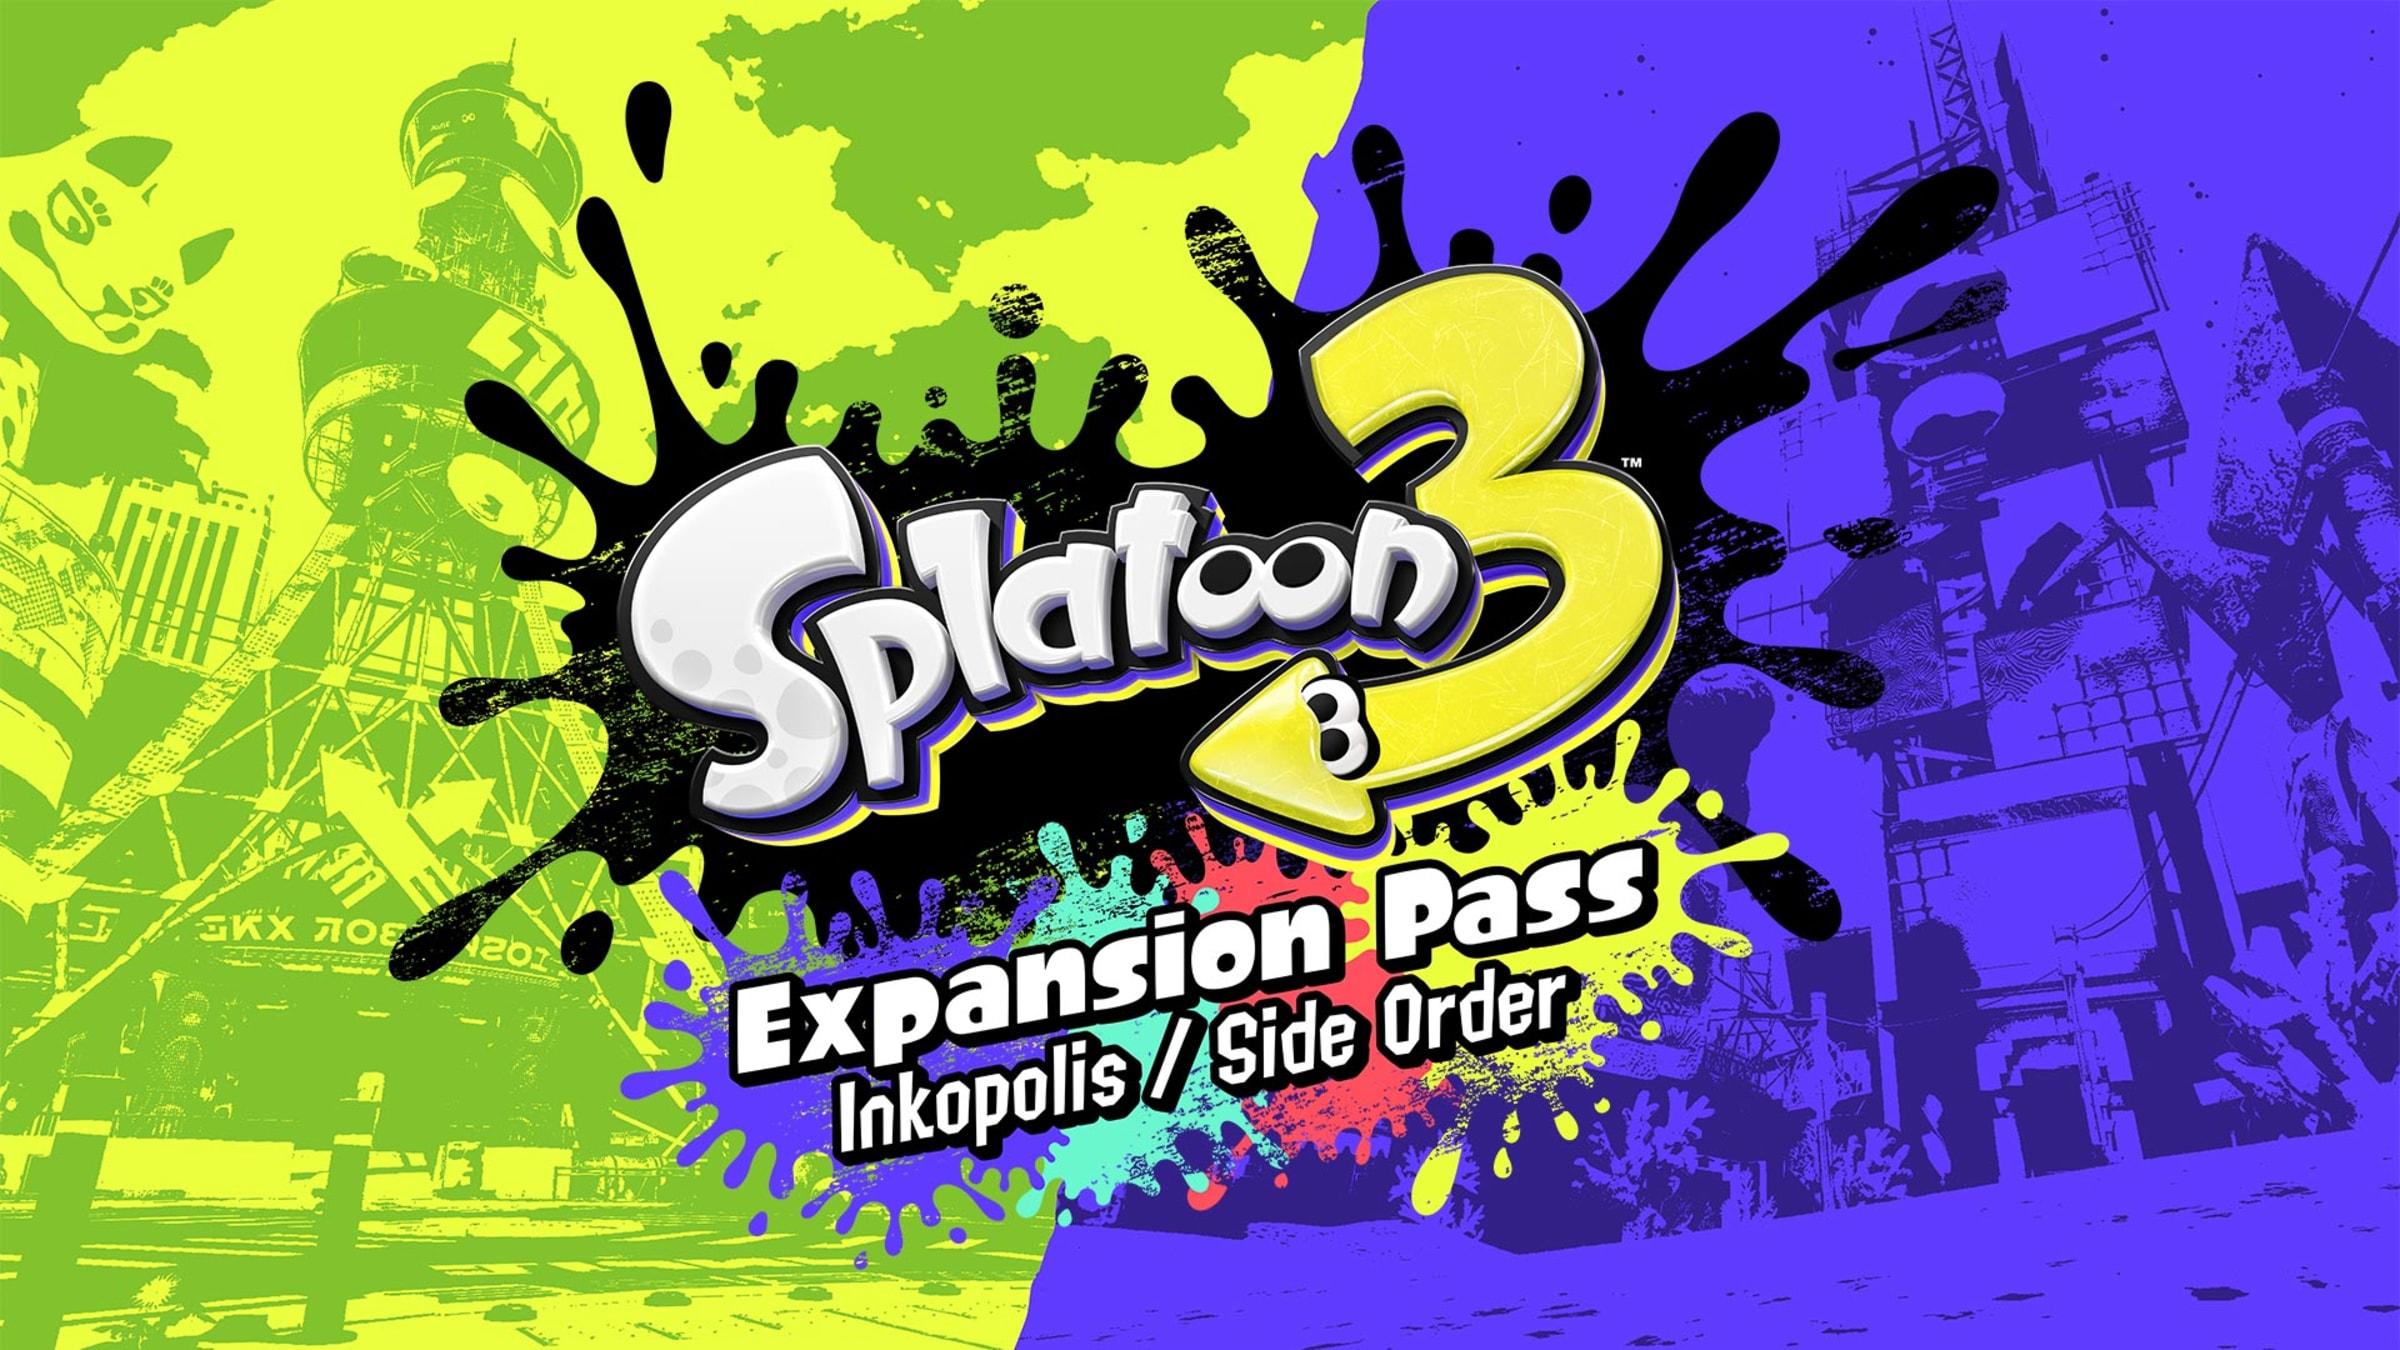 Expansion Pass, Official Website